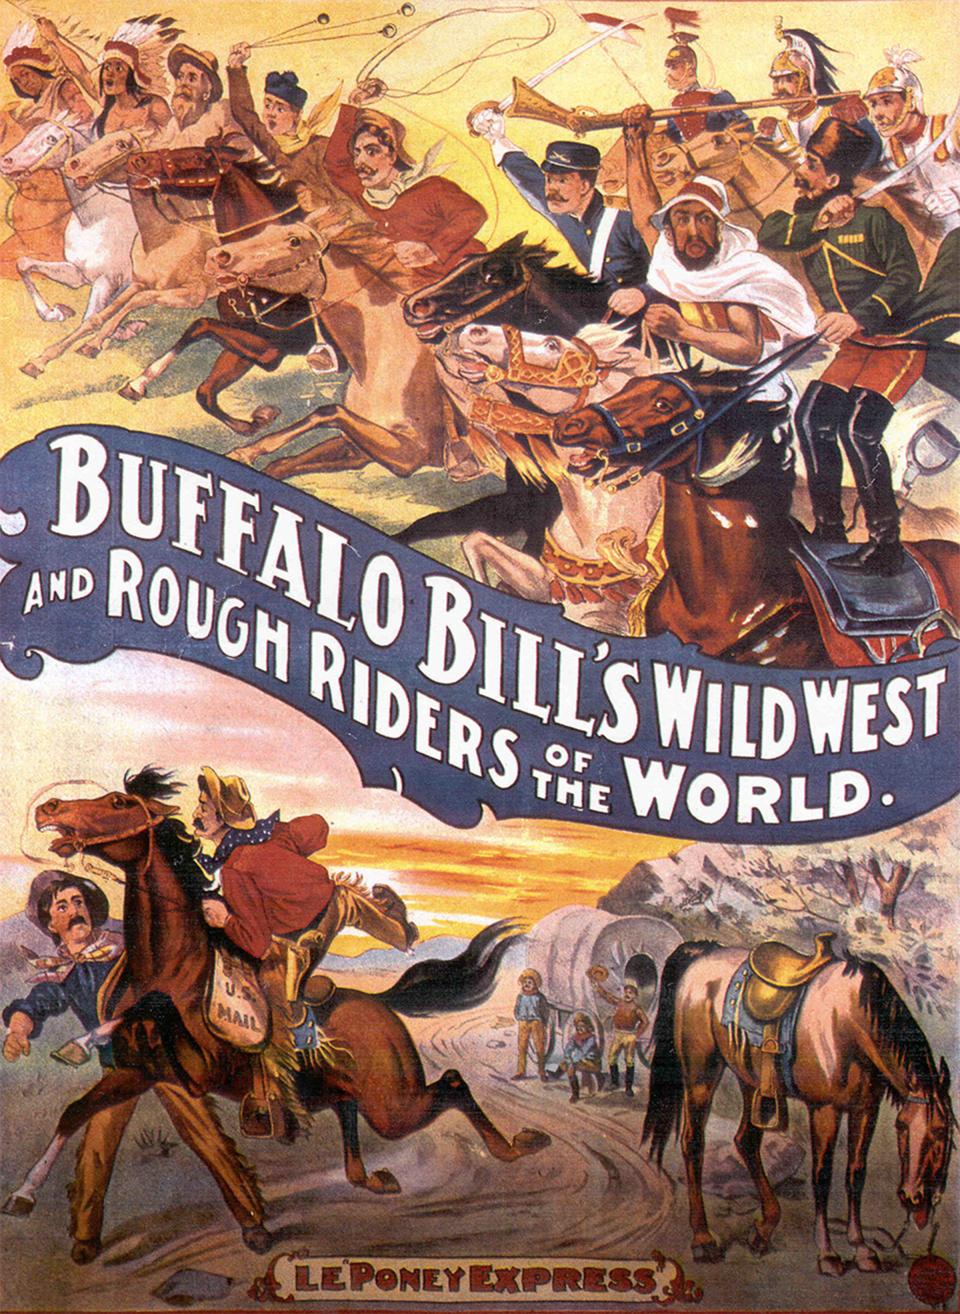 The Wild West show thrilled audiences throughout America and Europe for more than thirty years with its exhilarating Pony Express segment. This poster, promoting a show in Paris, features “Le Poney Express.”  Smithsonian National Postal Museum.